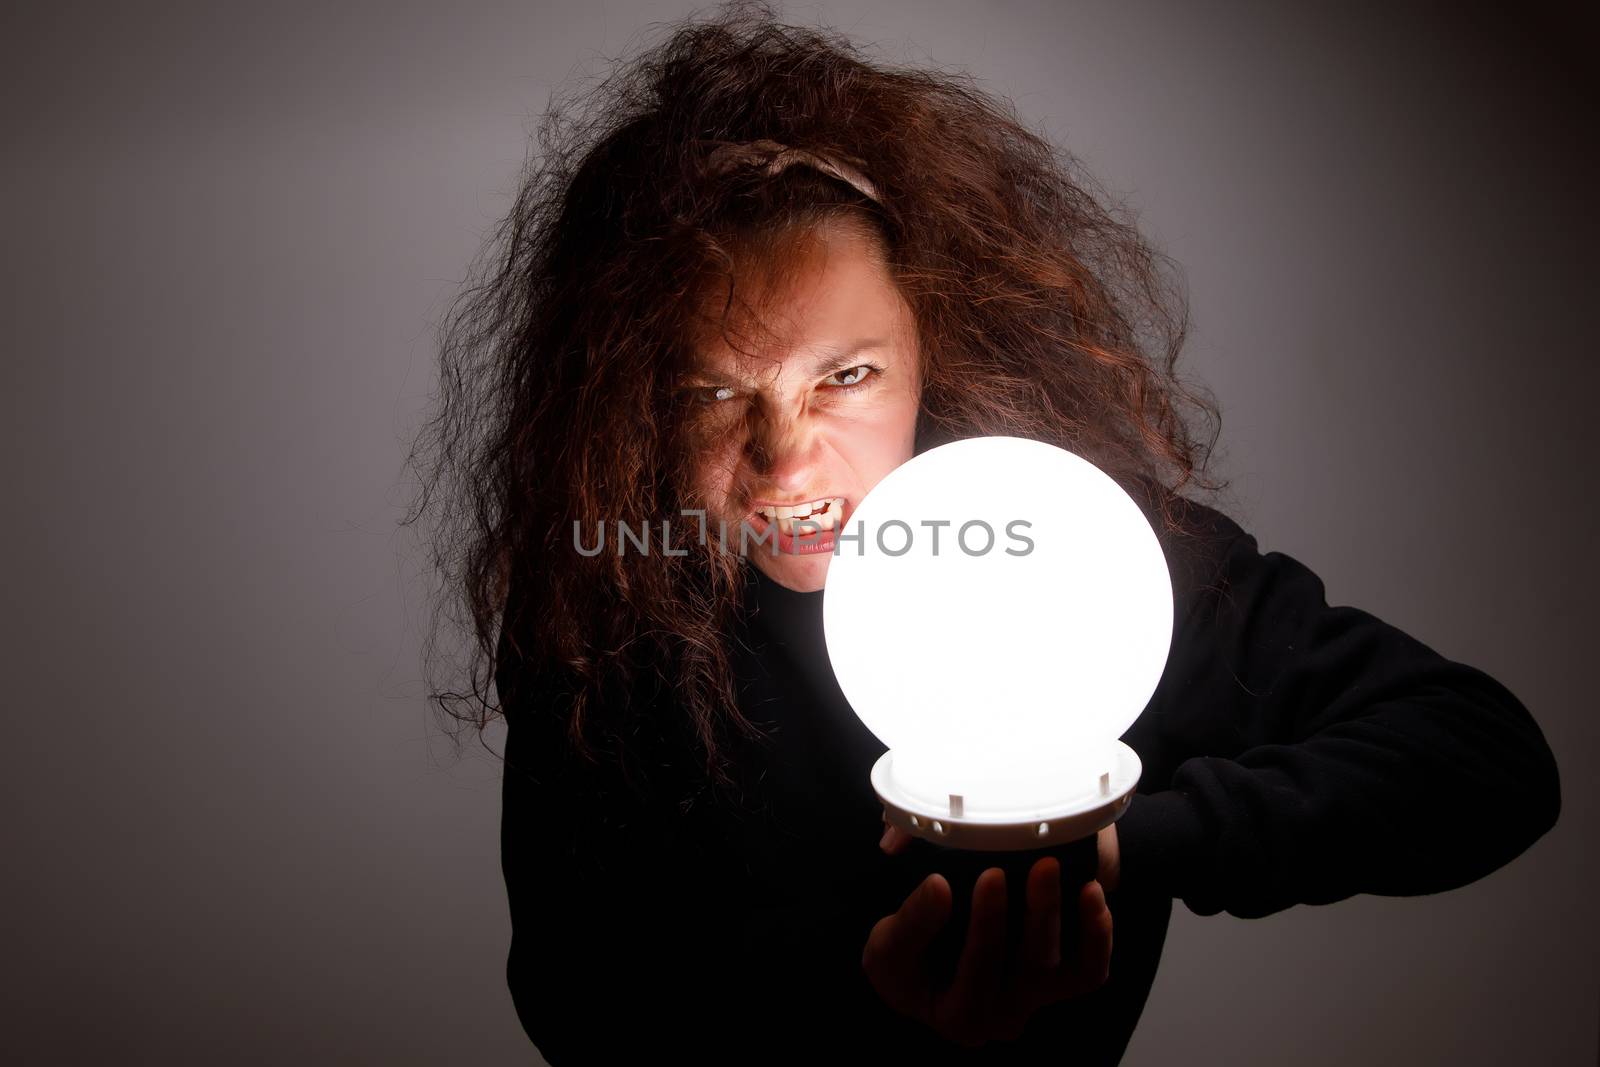 Fortuneteller holding a glowing ball in her hands.